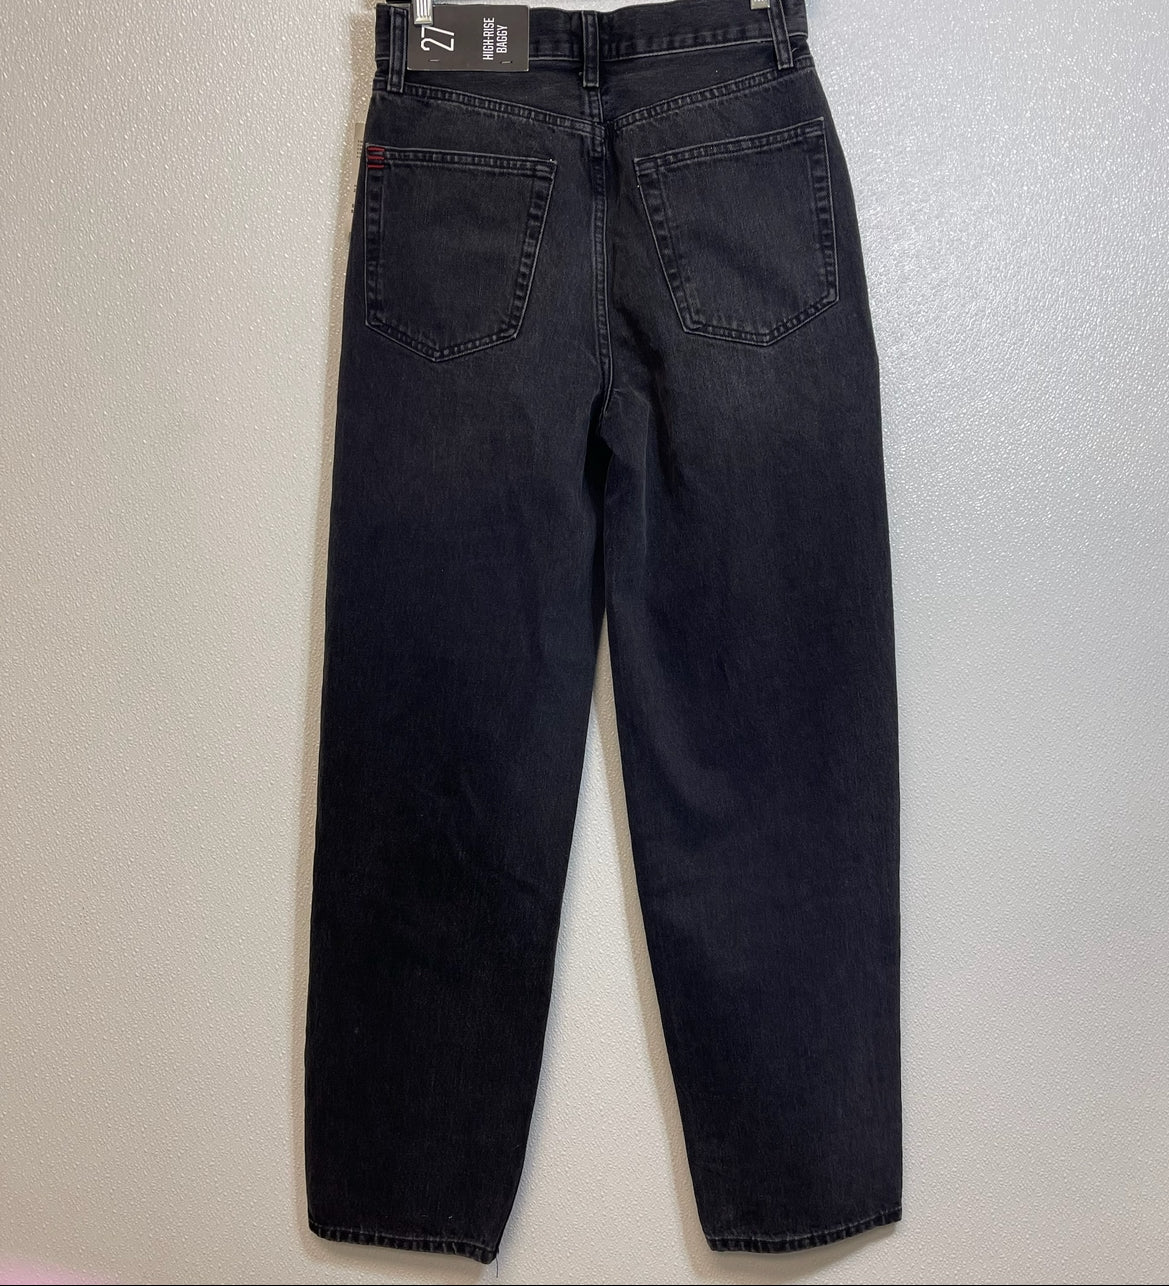 Black Jeans Relaxed/boyfriend Urban Outfitters, Size 4